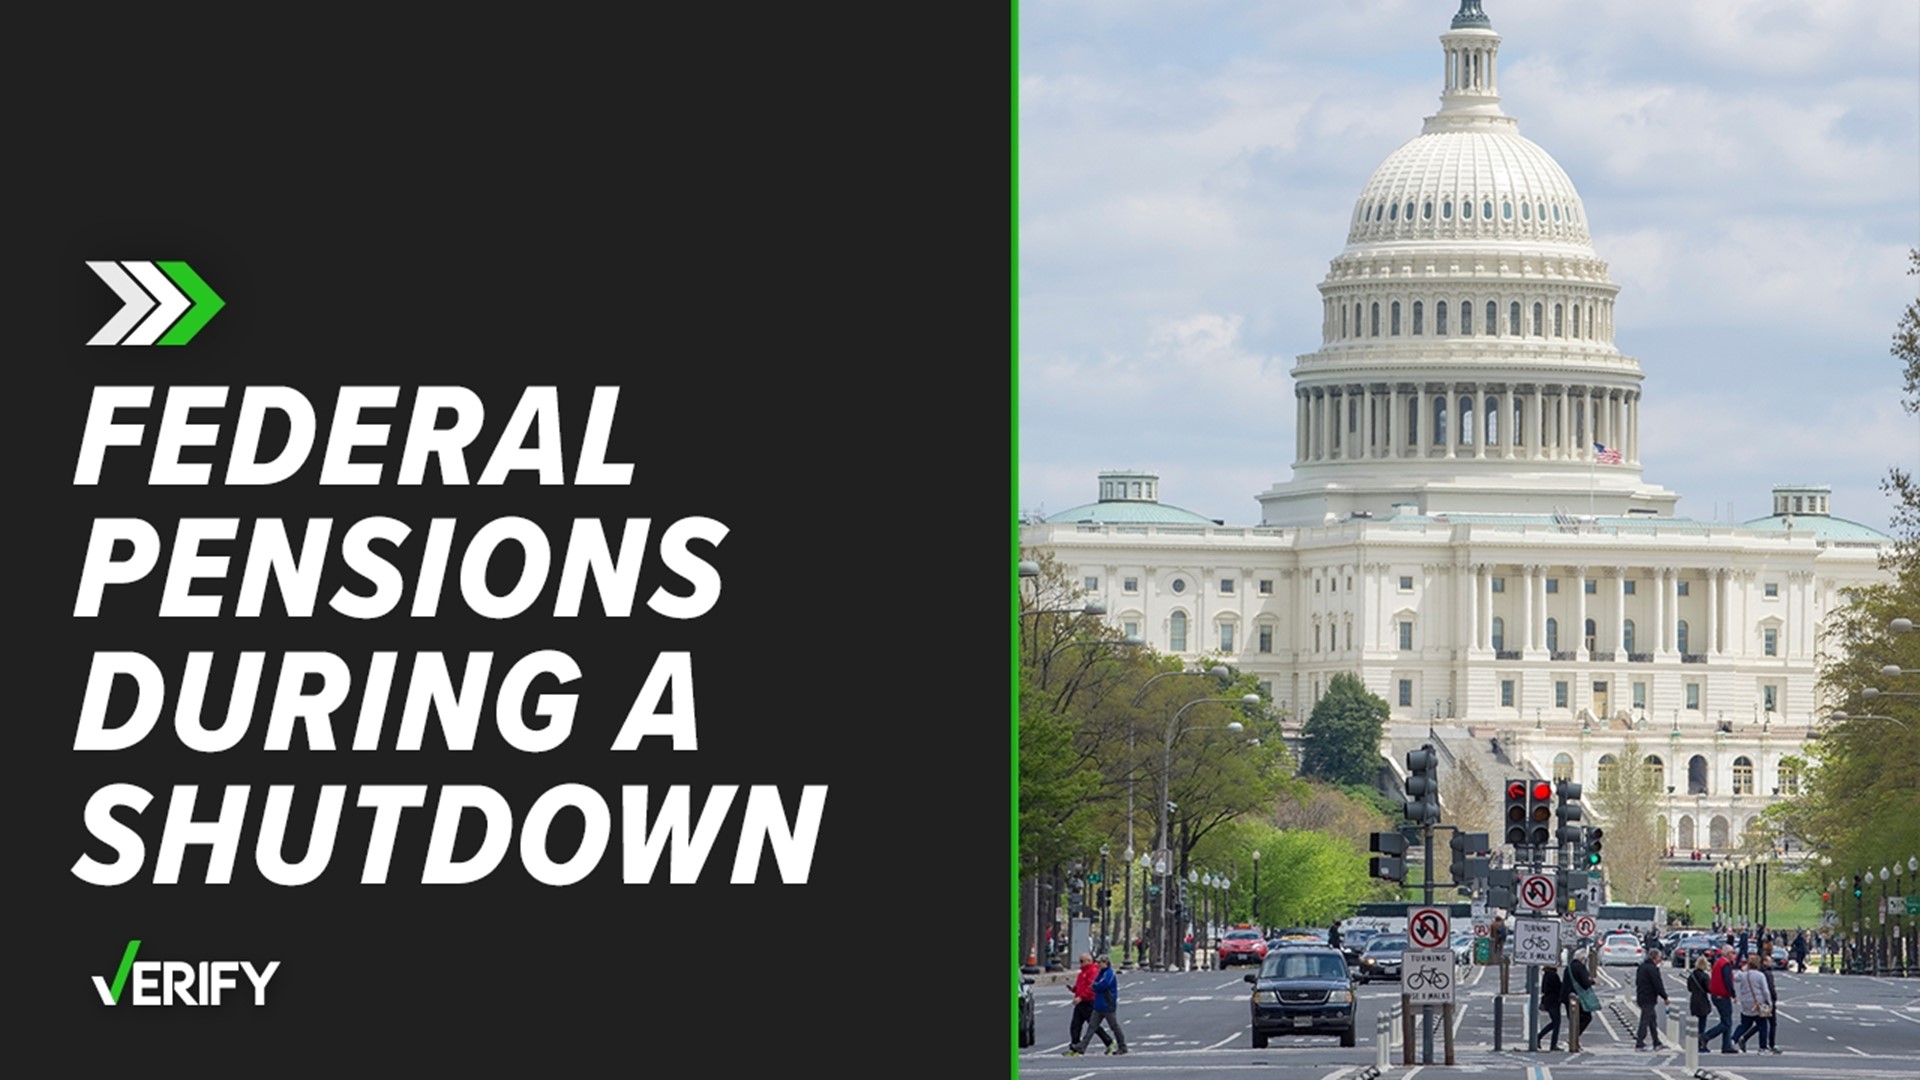 Federal retirees, including military veterans, will still get retirement checks during a shutdown. Social Security won’t be affected, either.